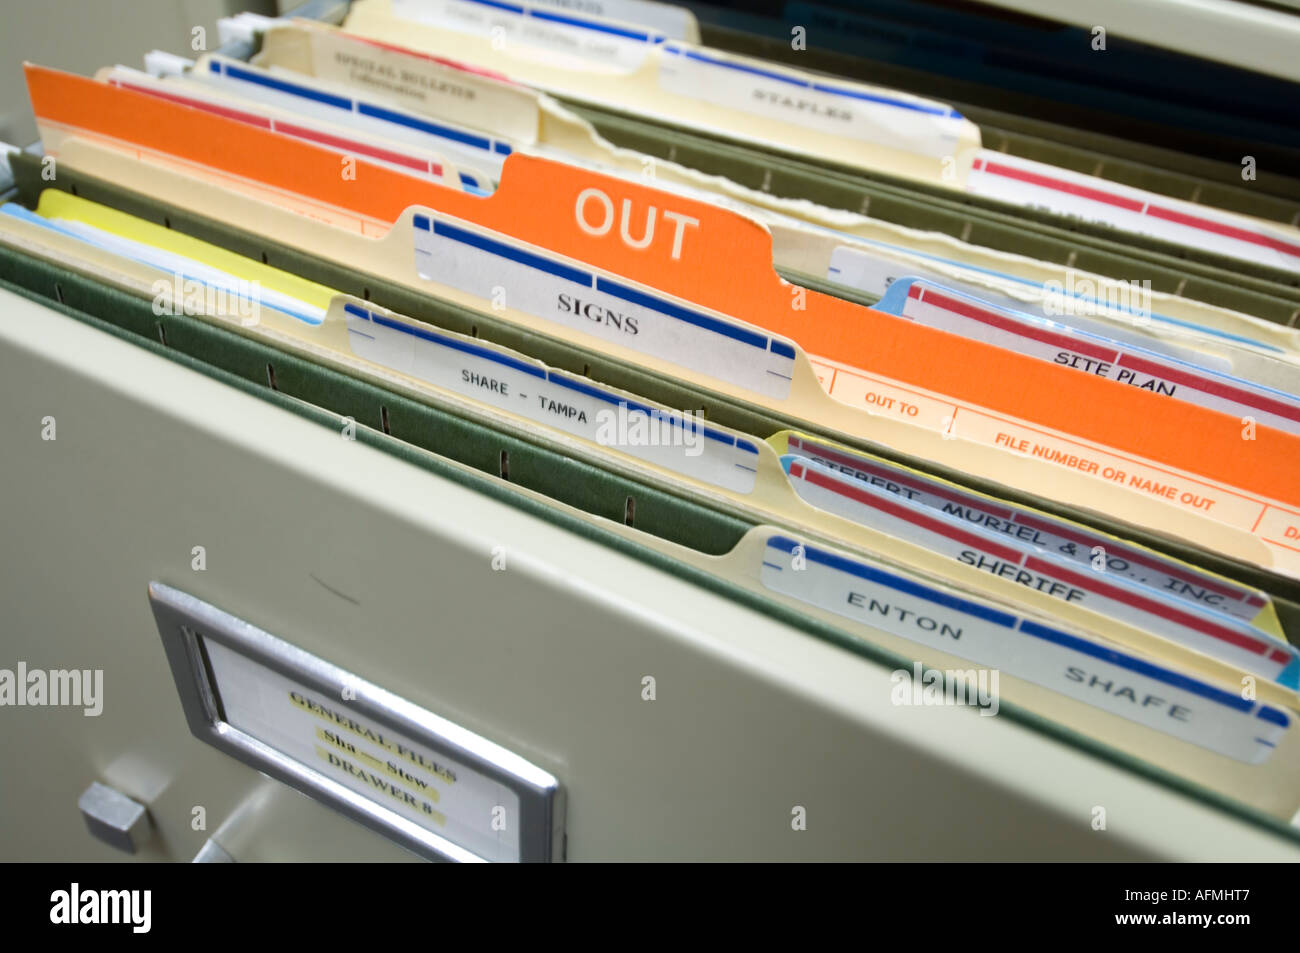 metal file cabinet in office Stock Photo